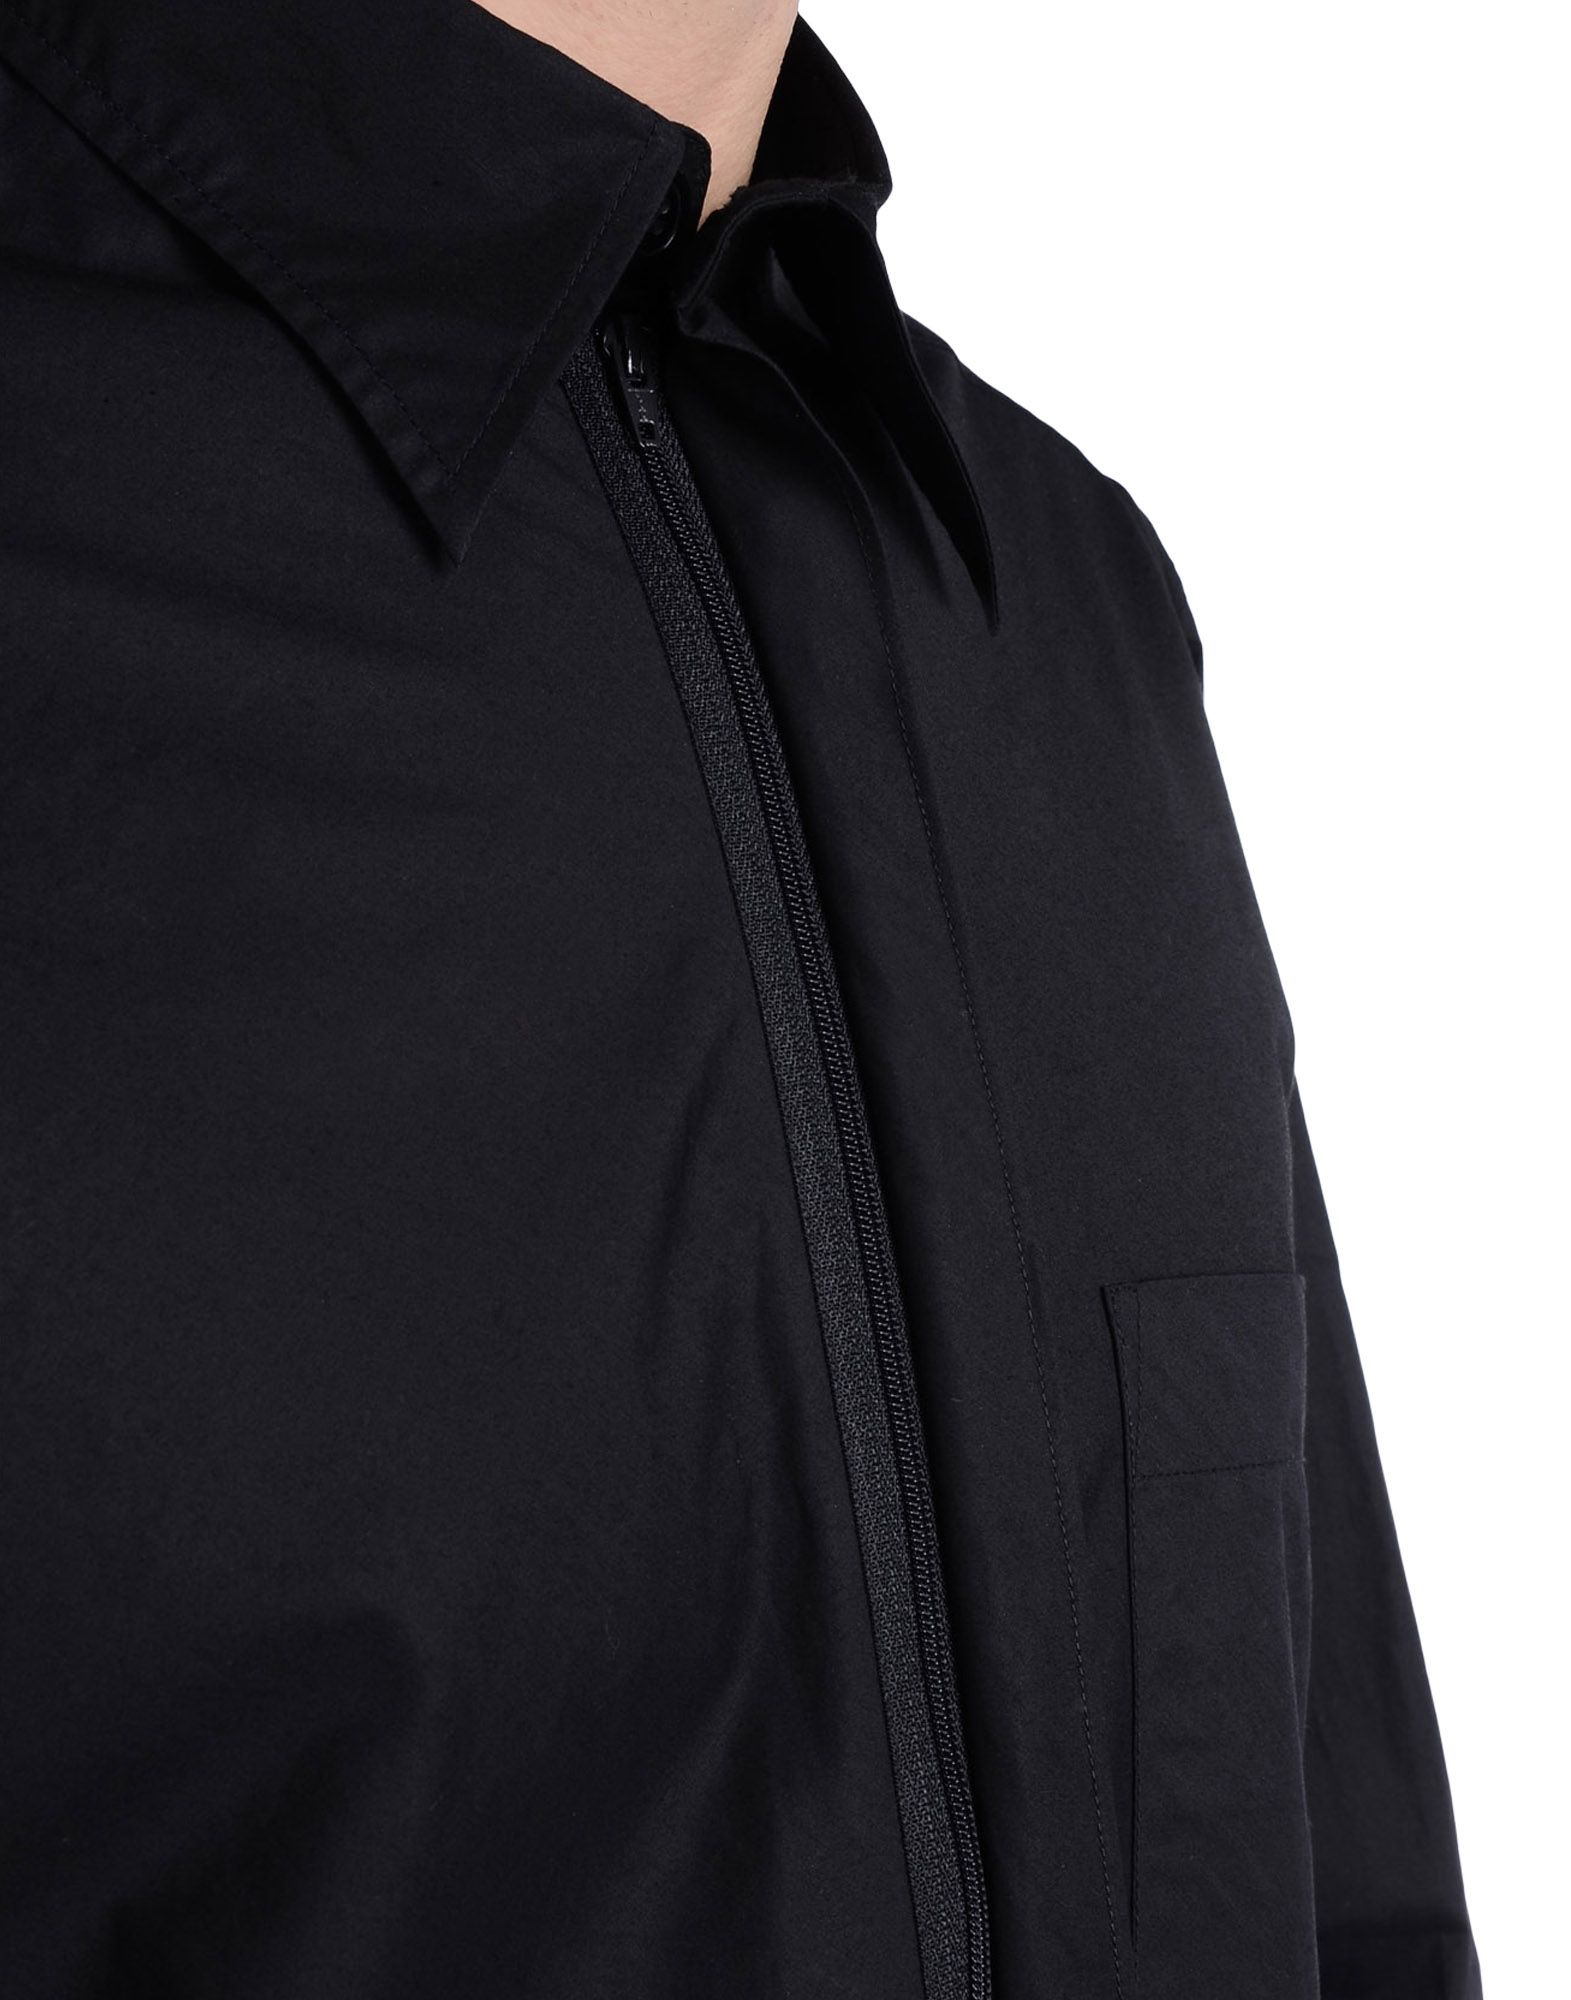 Y 3 COLLAR LONG SHIRT for Men | Adidas Y-3 Official Store